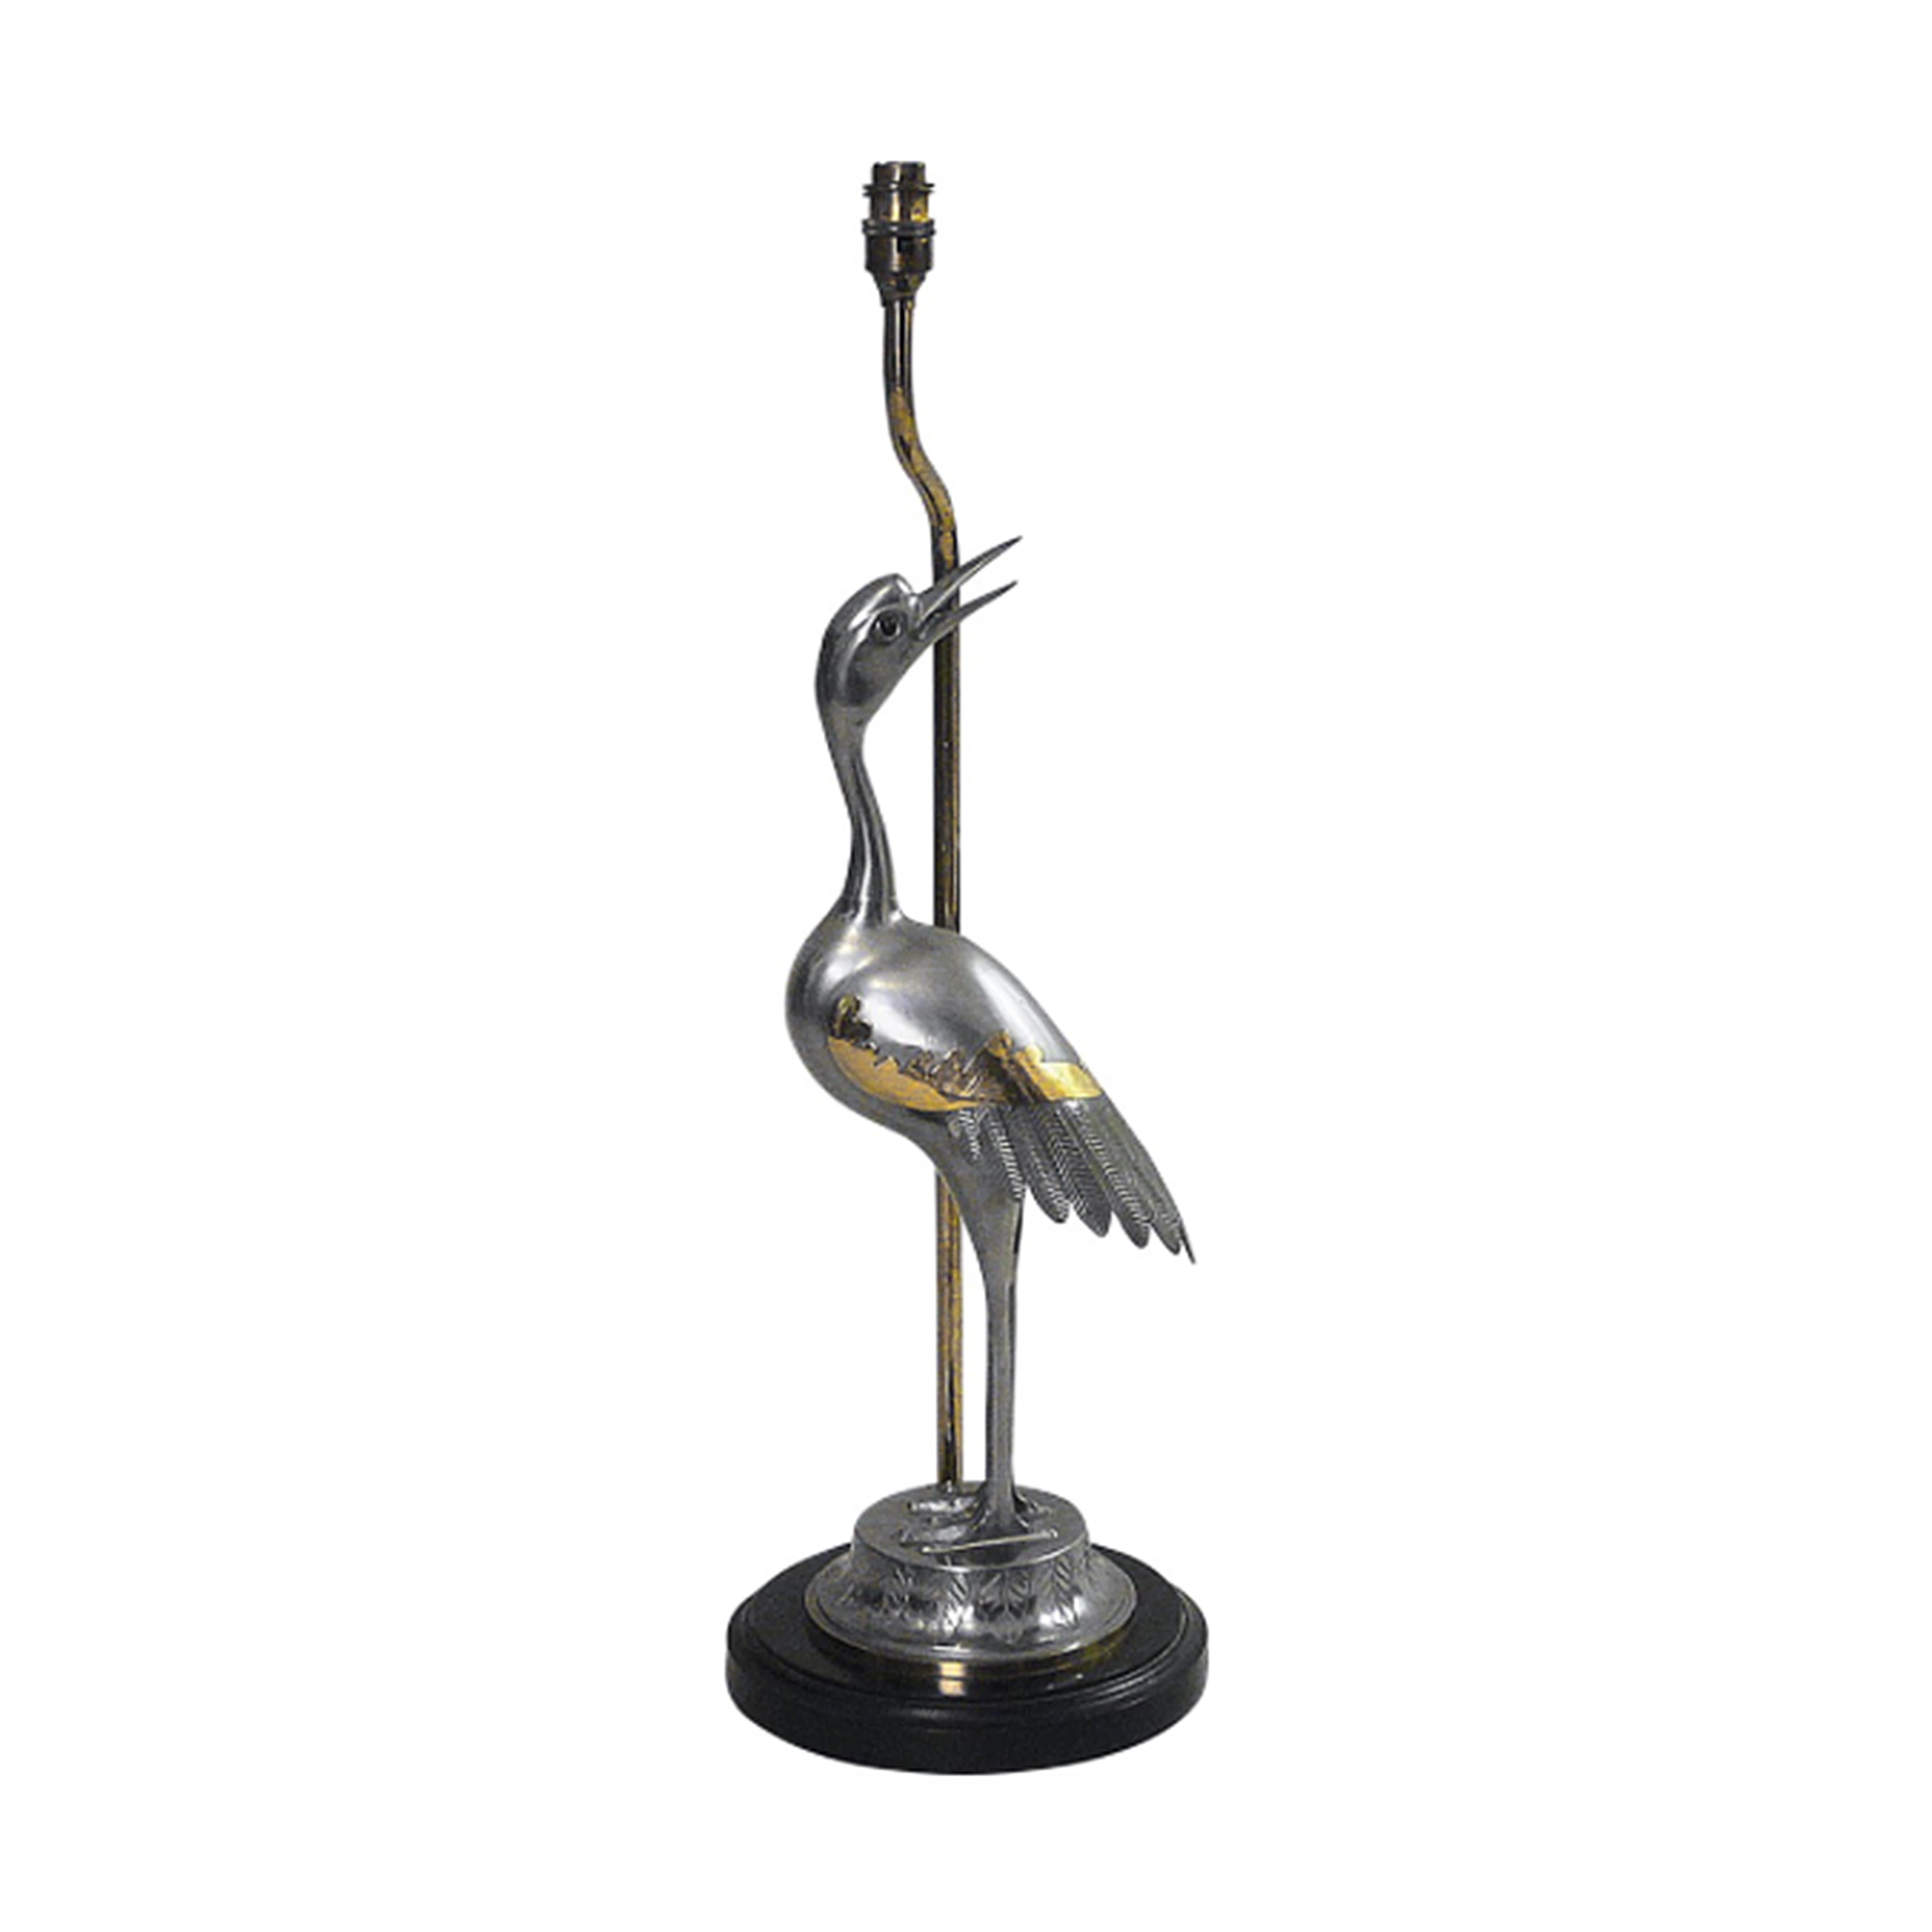 Elegant heron table lamp with beautiful details standing on a chrome and wood base. Shade is for display purposes only. Shade not included for display purposes only.